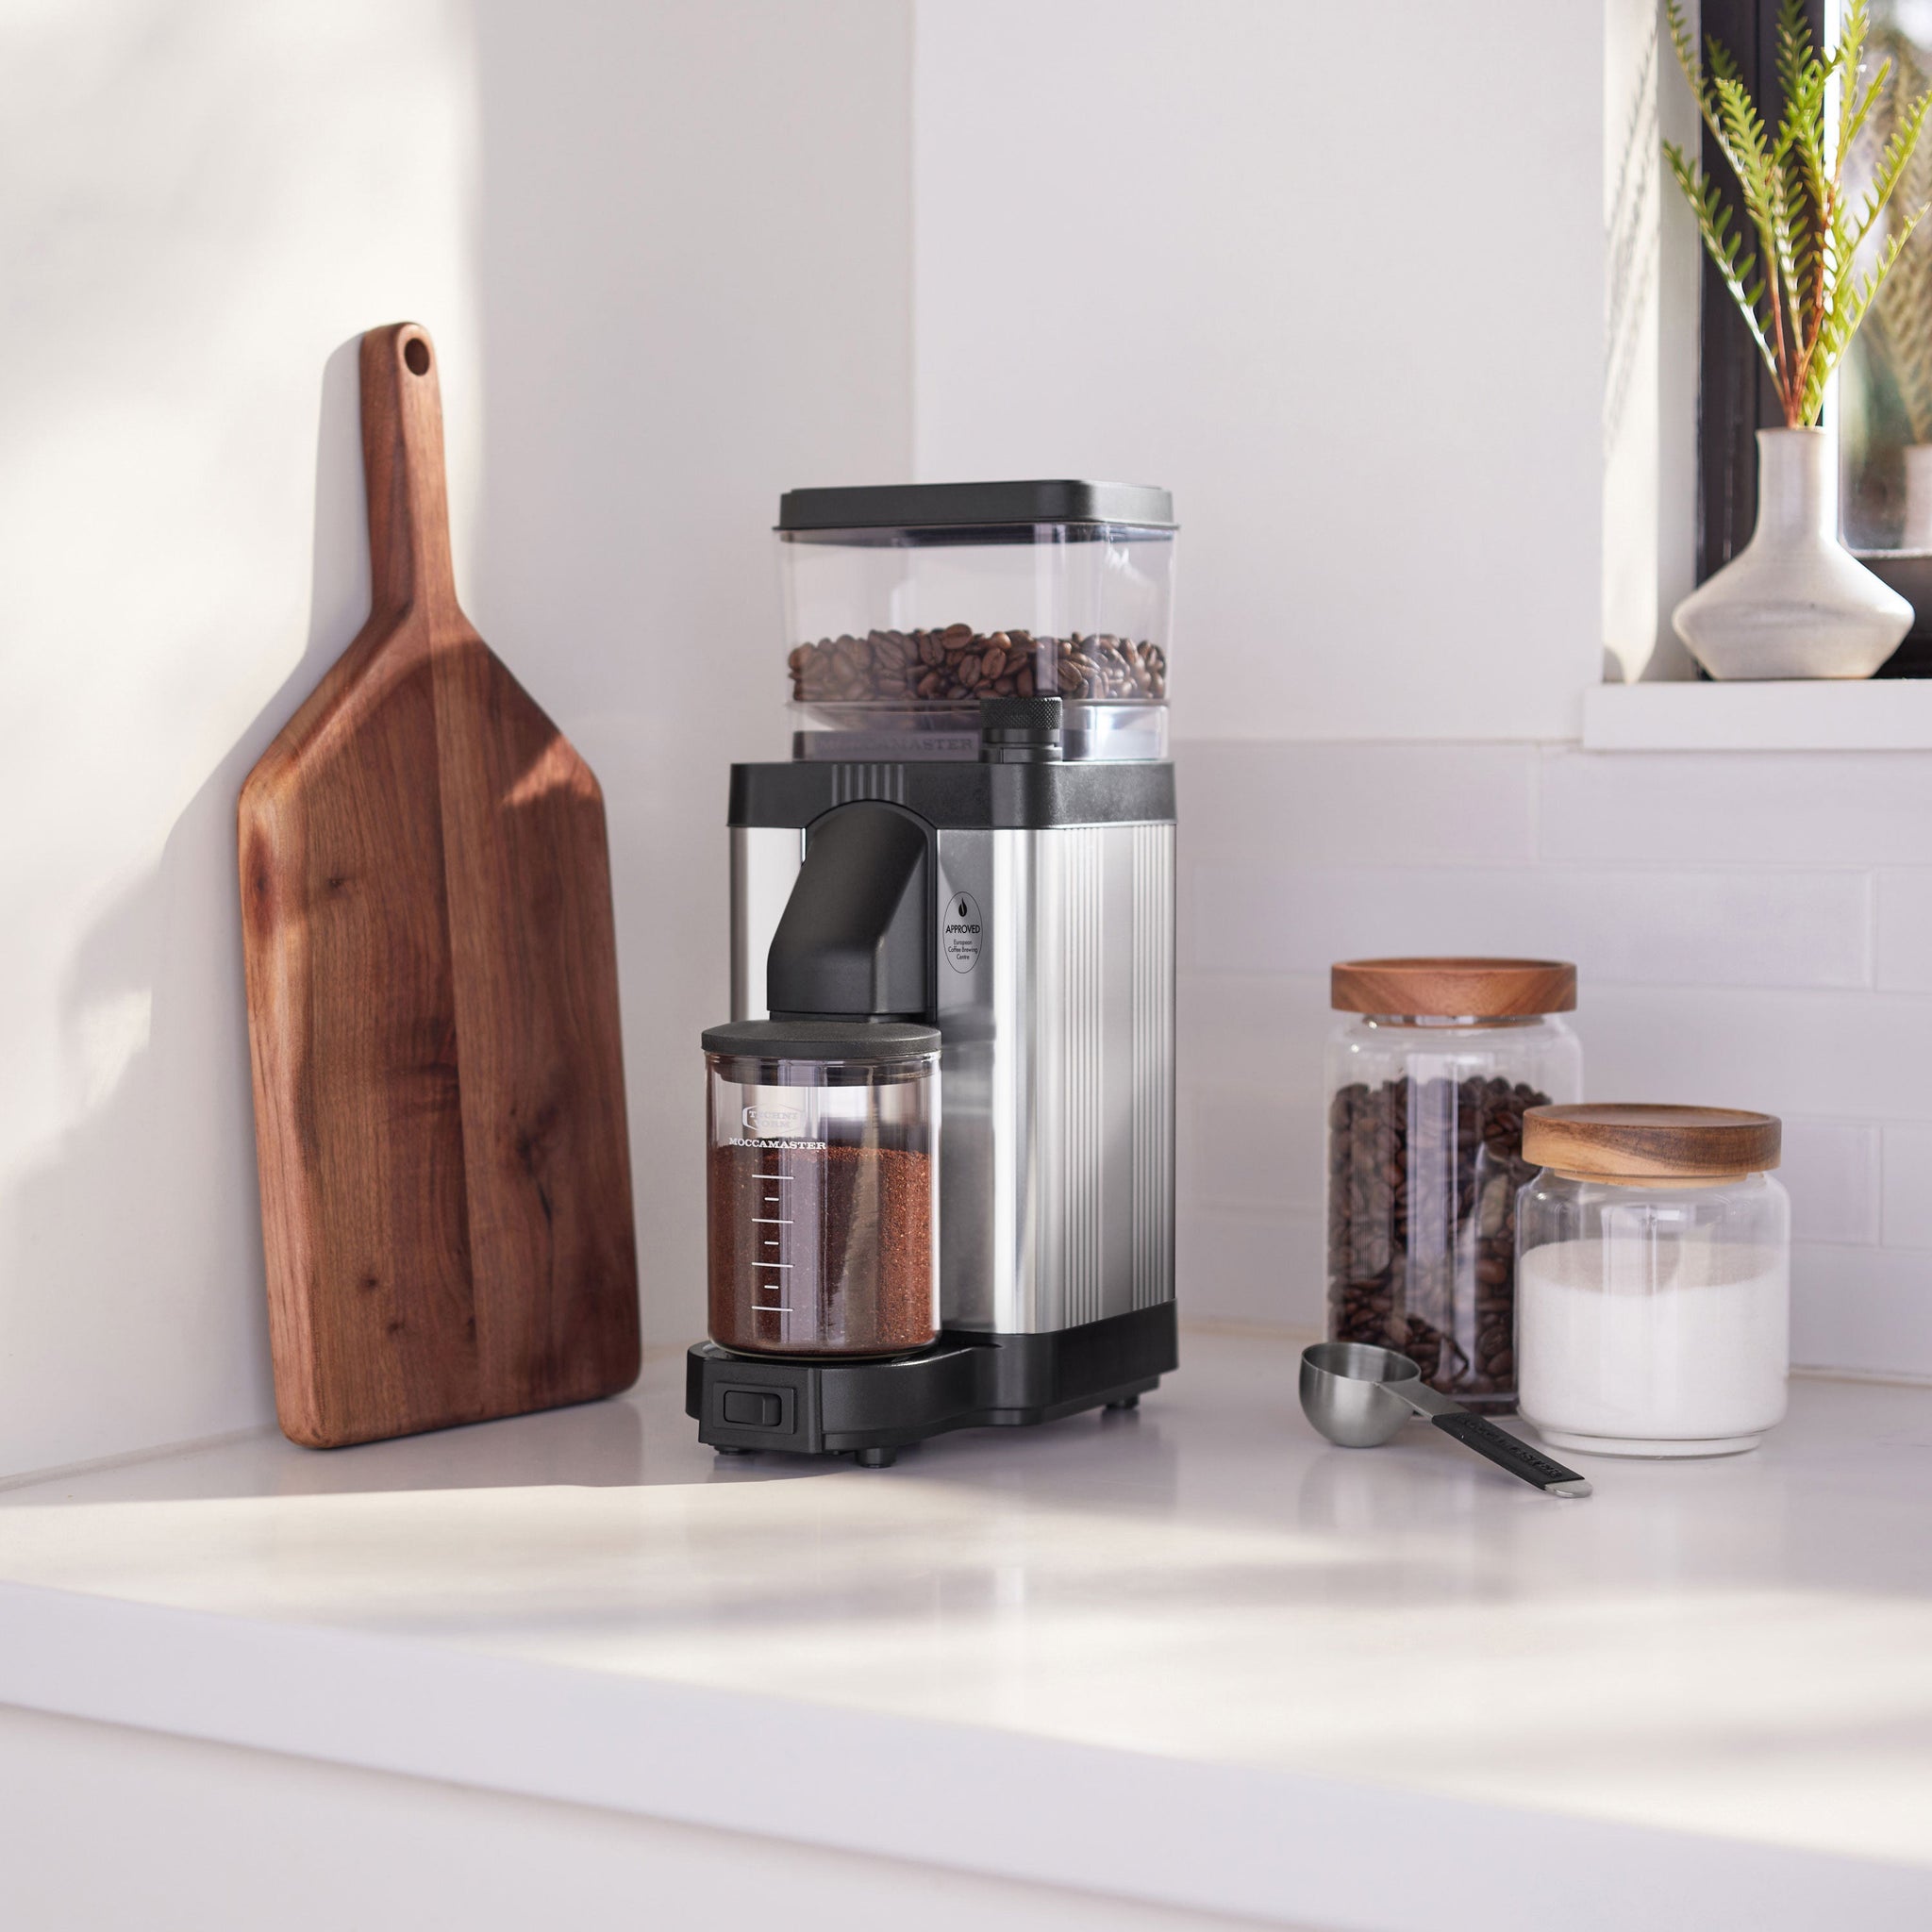 Moccamaster's luxurious KM5 Burr Grinder wants to level up your